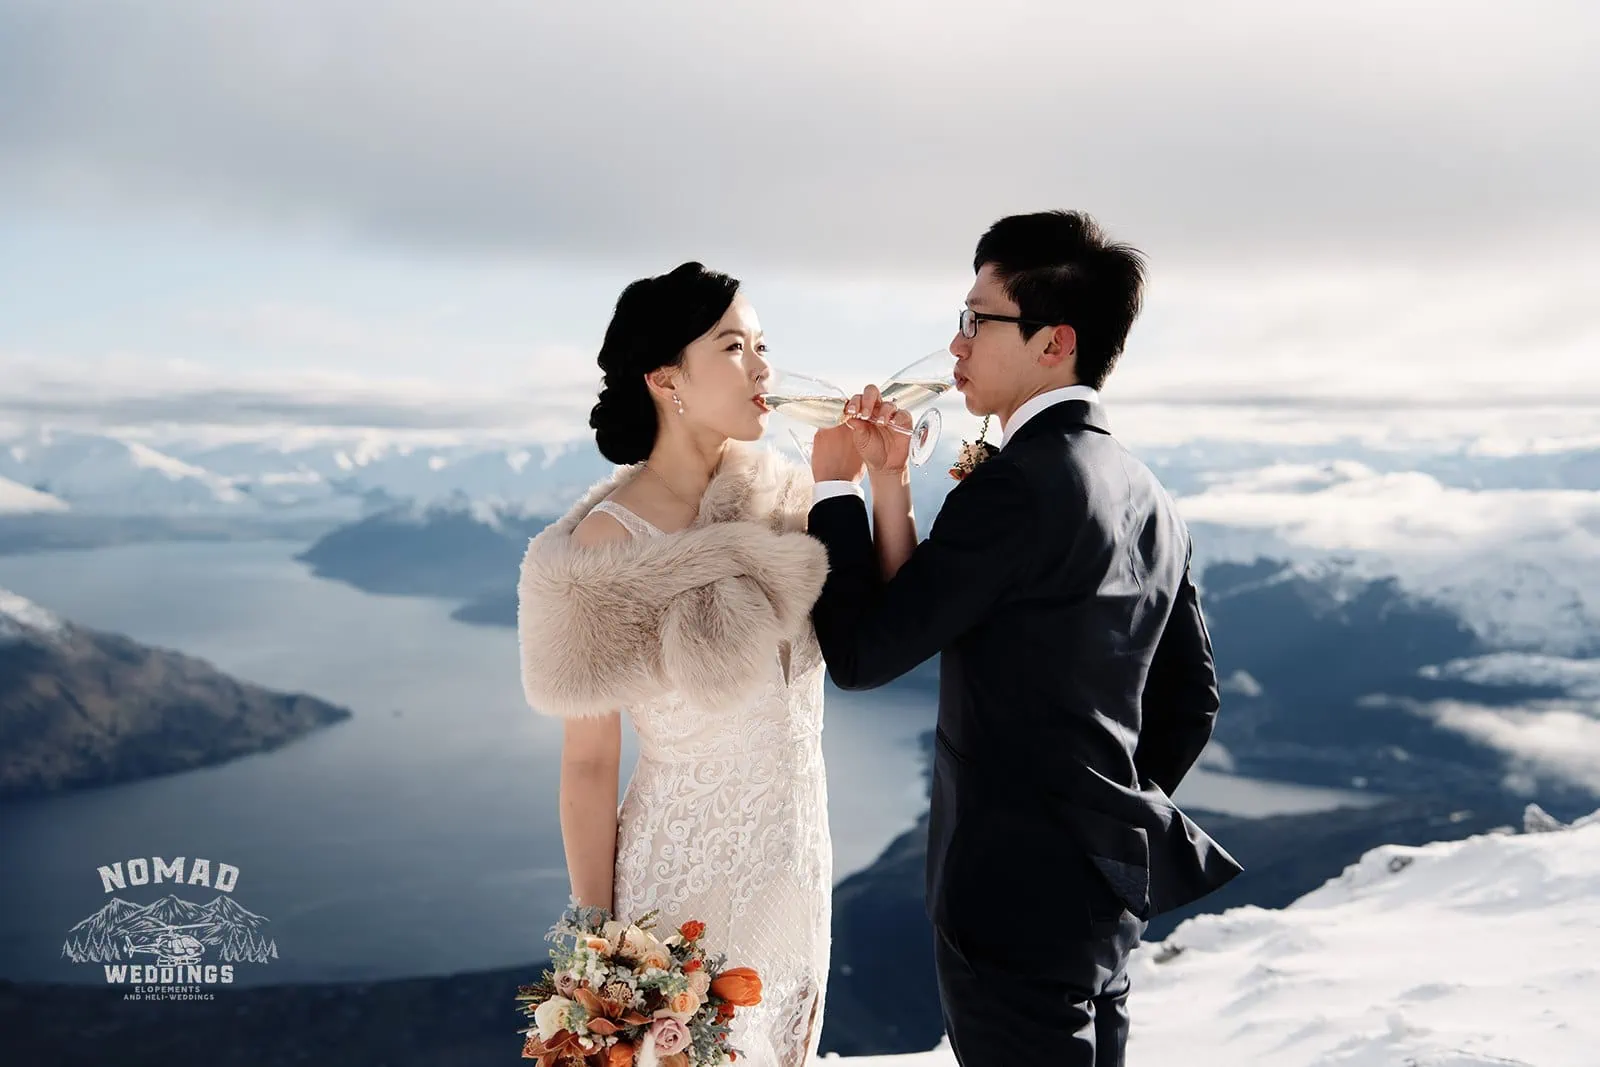 Joanna and Tony enjoying a glass of wine during their pre-wedding shoot in snowy Queenstown, New Zealand.